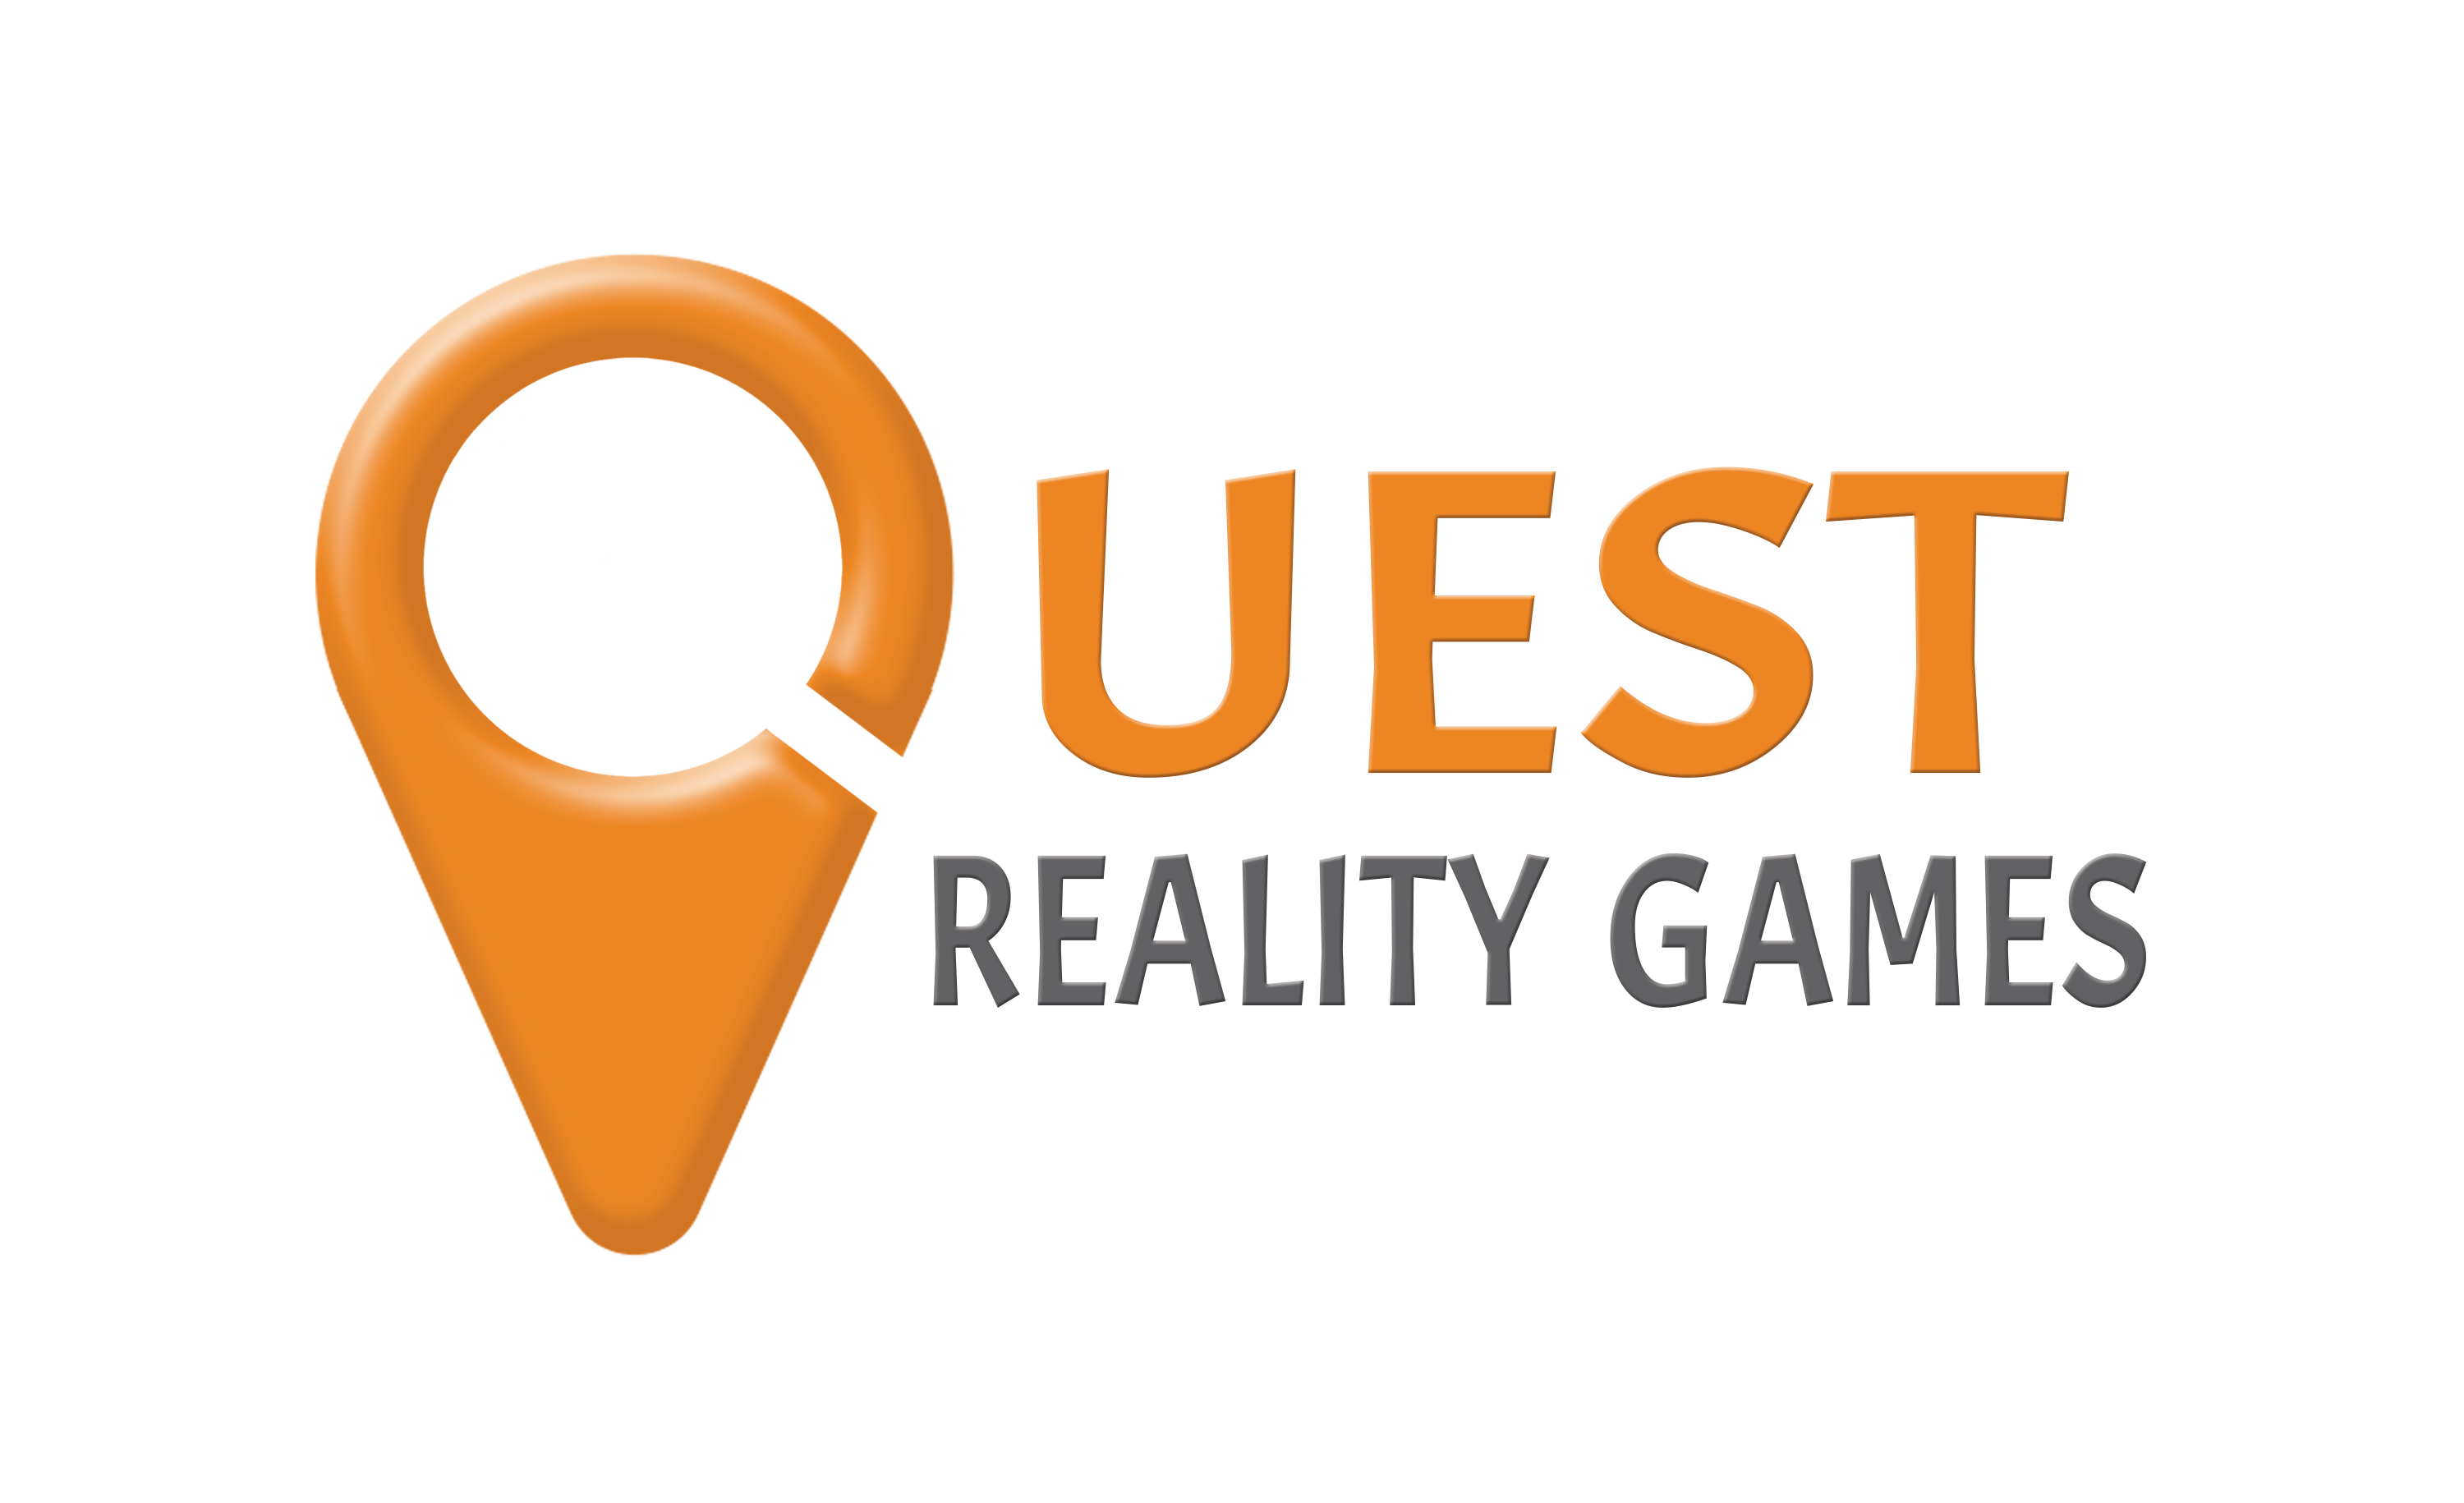 Quest Reality Games